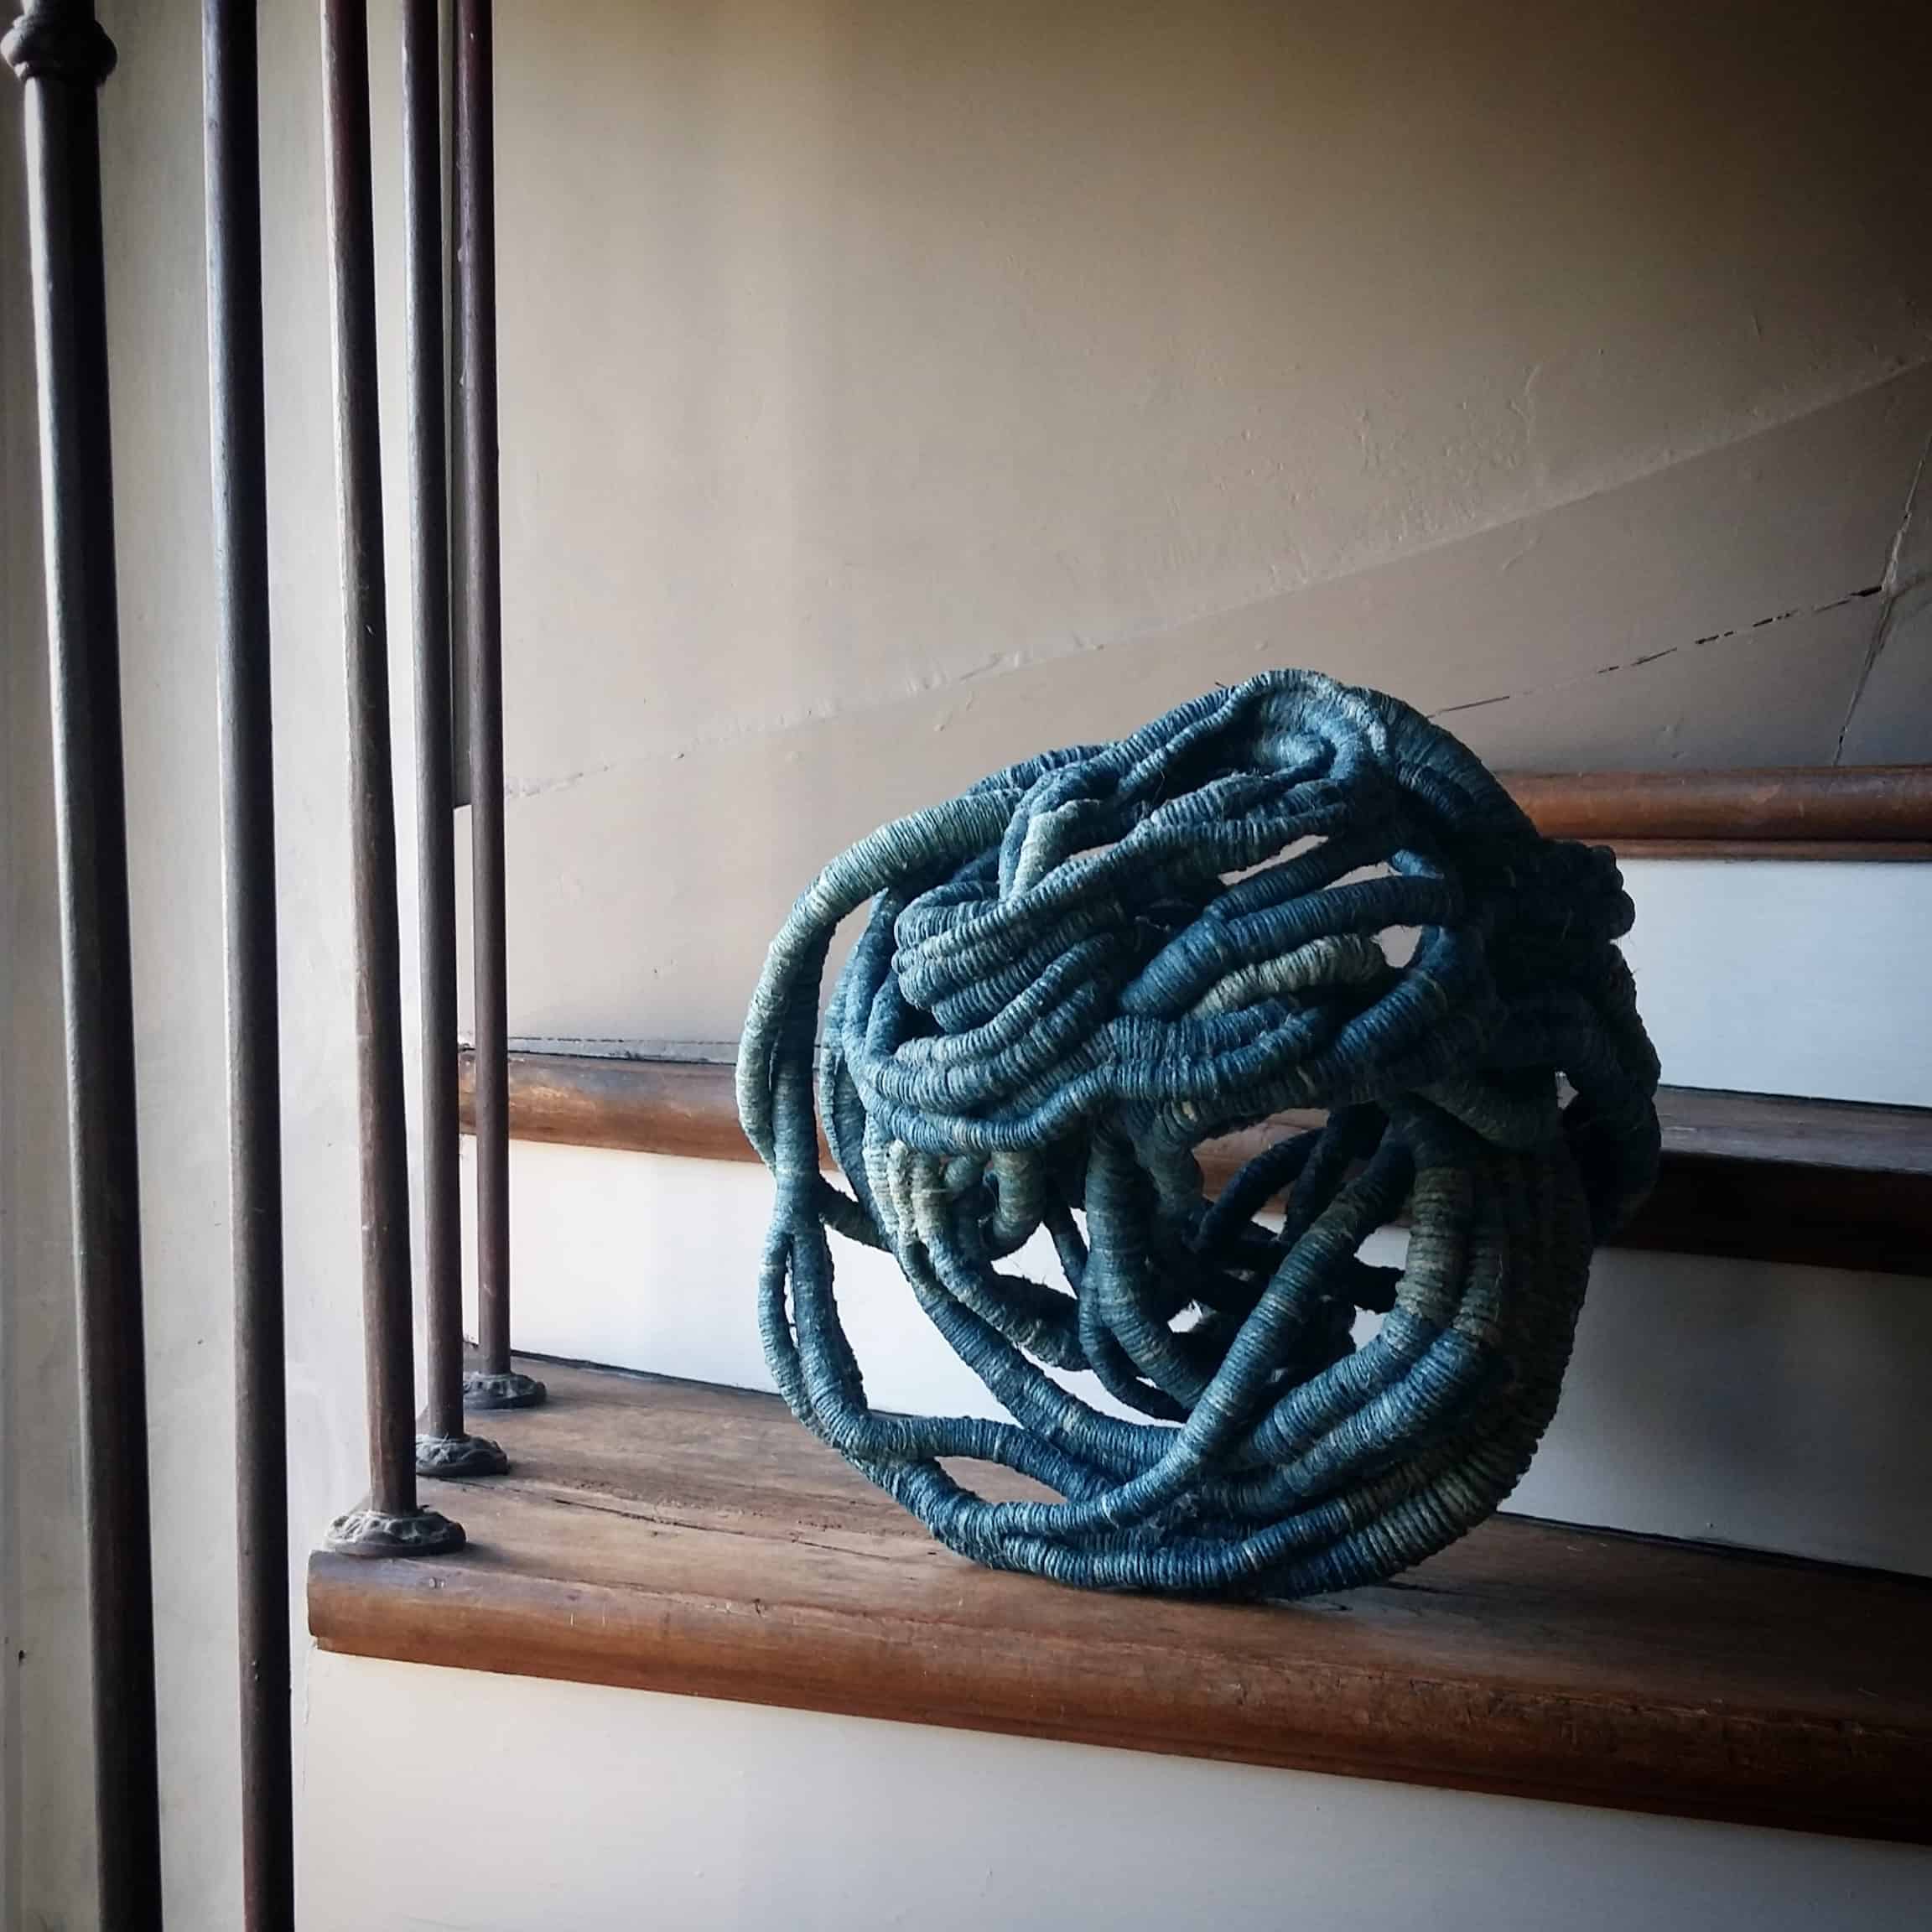 Turquoise blue sculpture by Aude Franjou in the stairs leading to the workshop